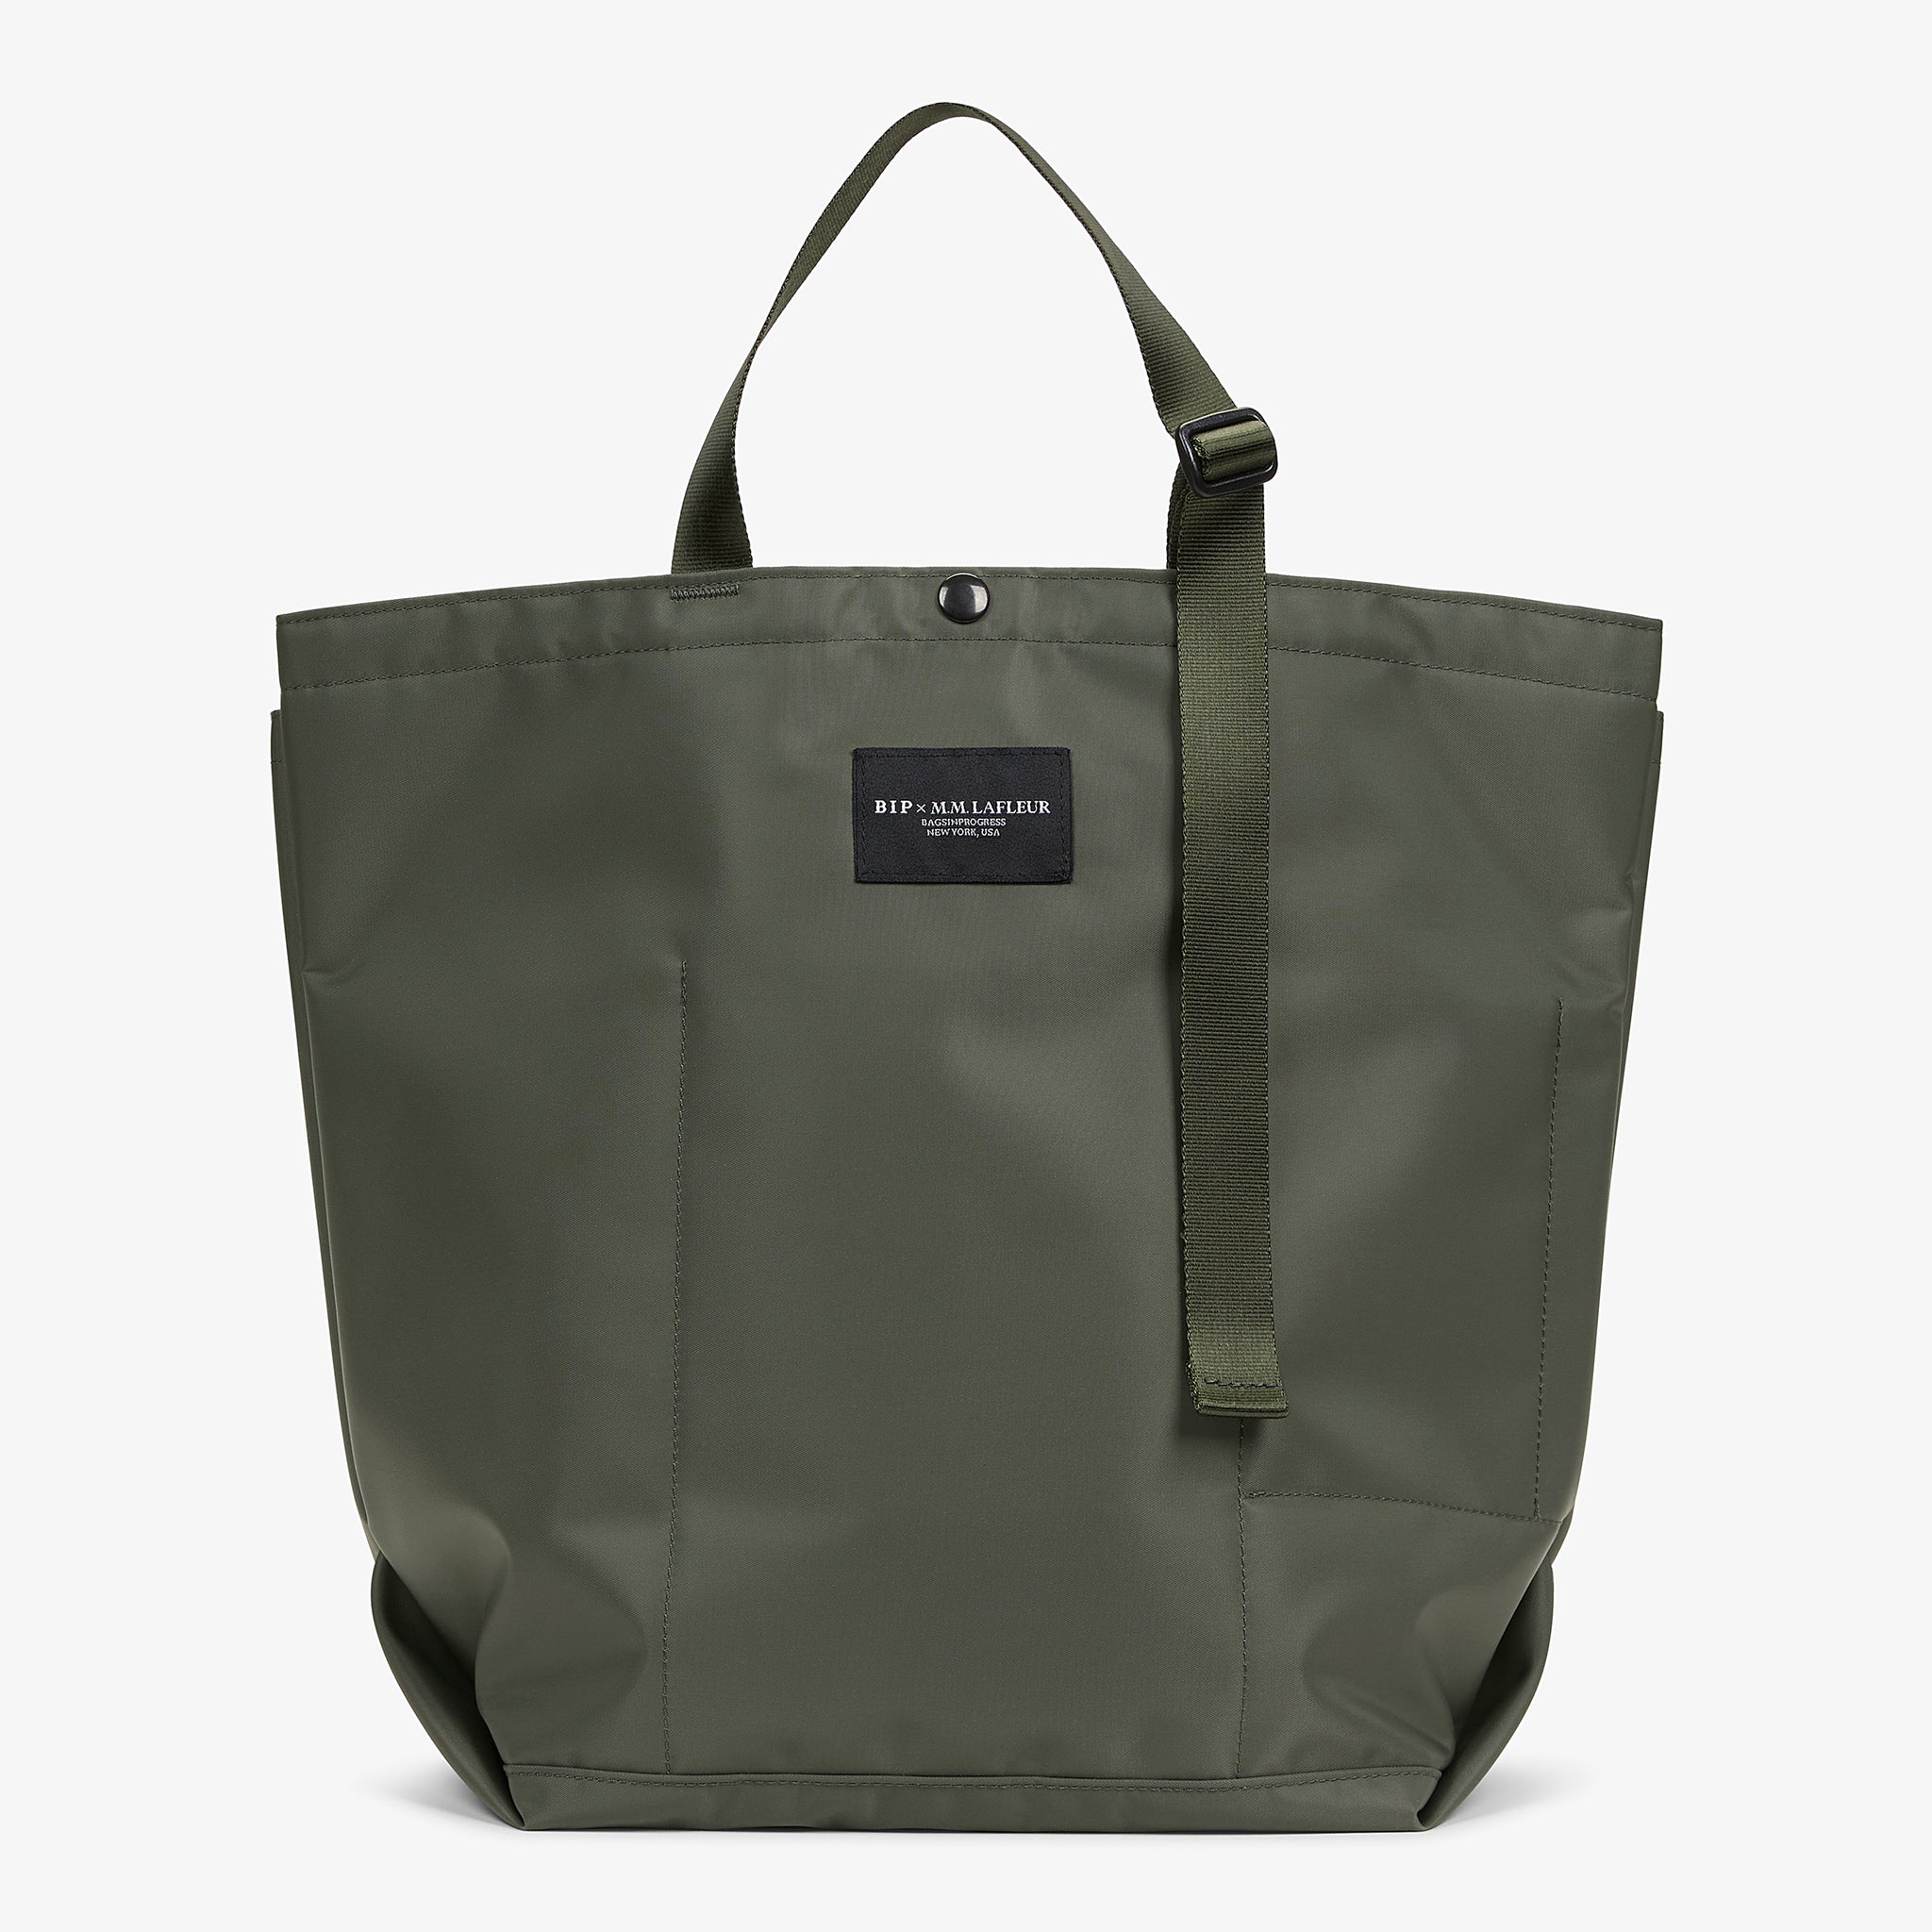 still image of Bags in Progress x MM Carry All Tote in Khaki Green  